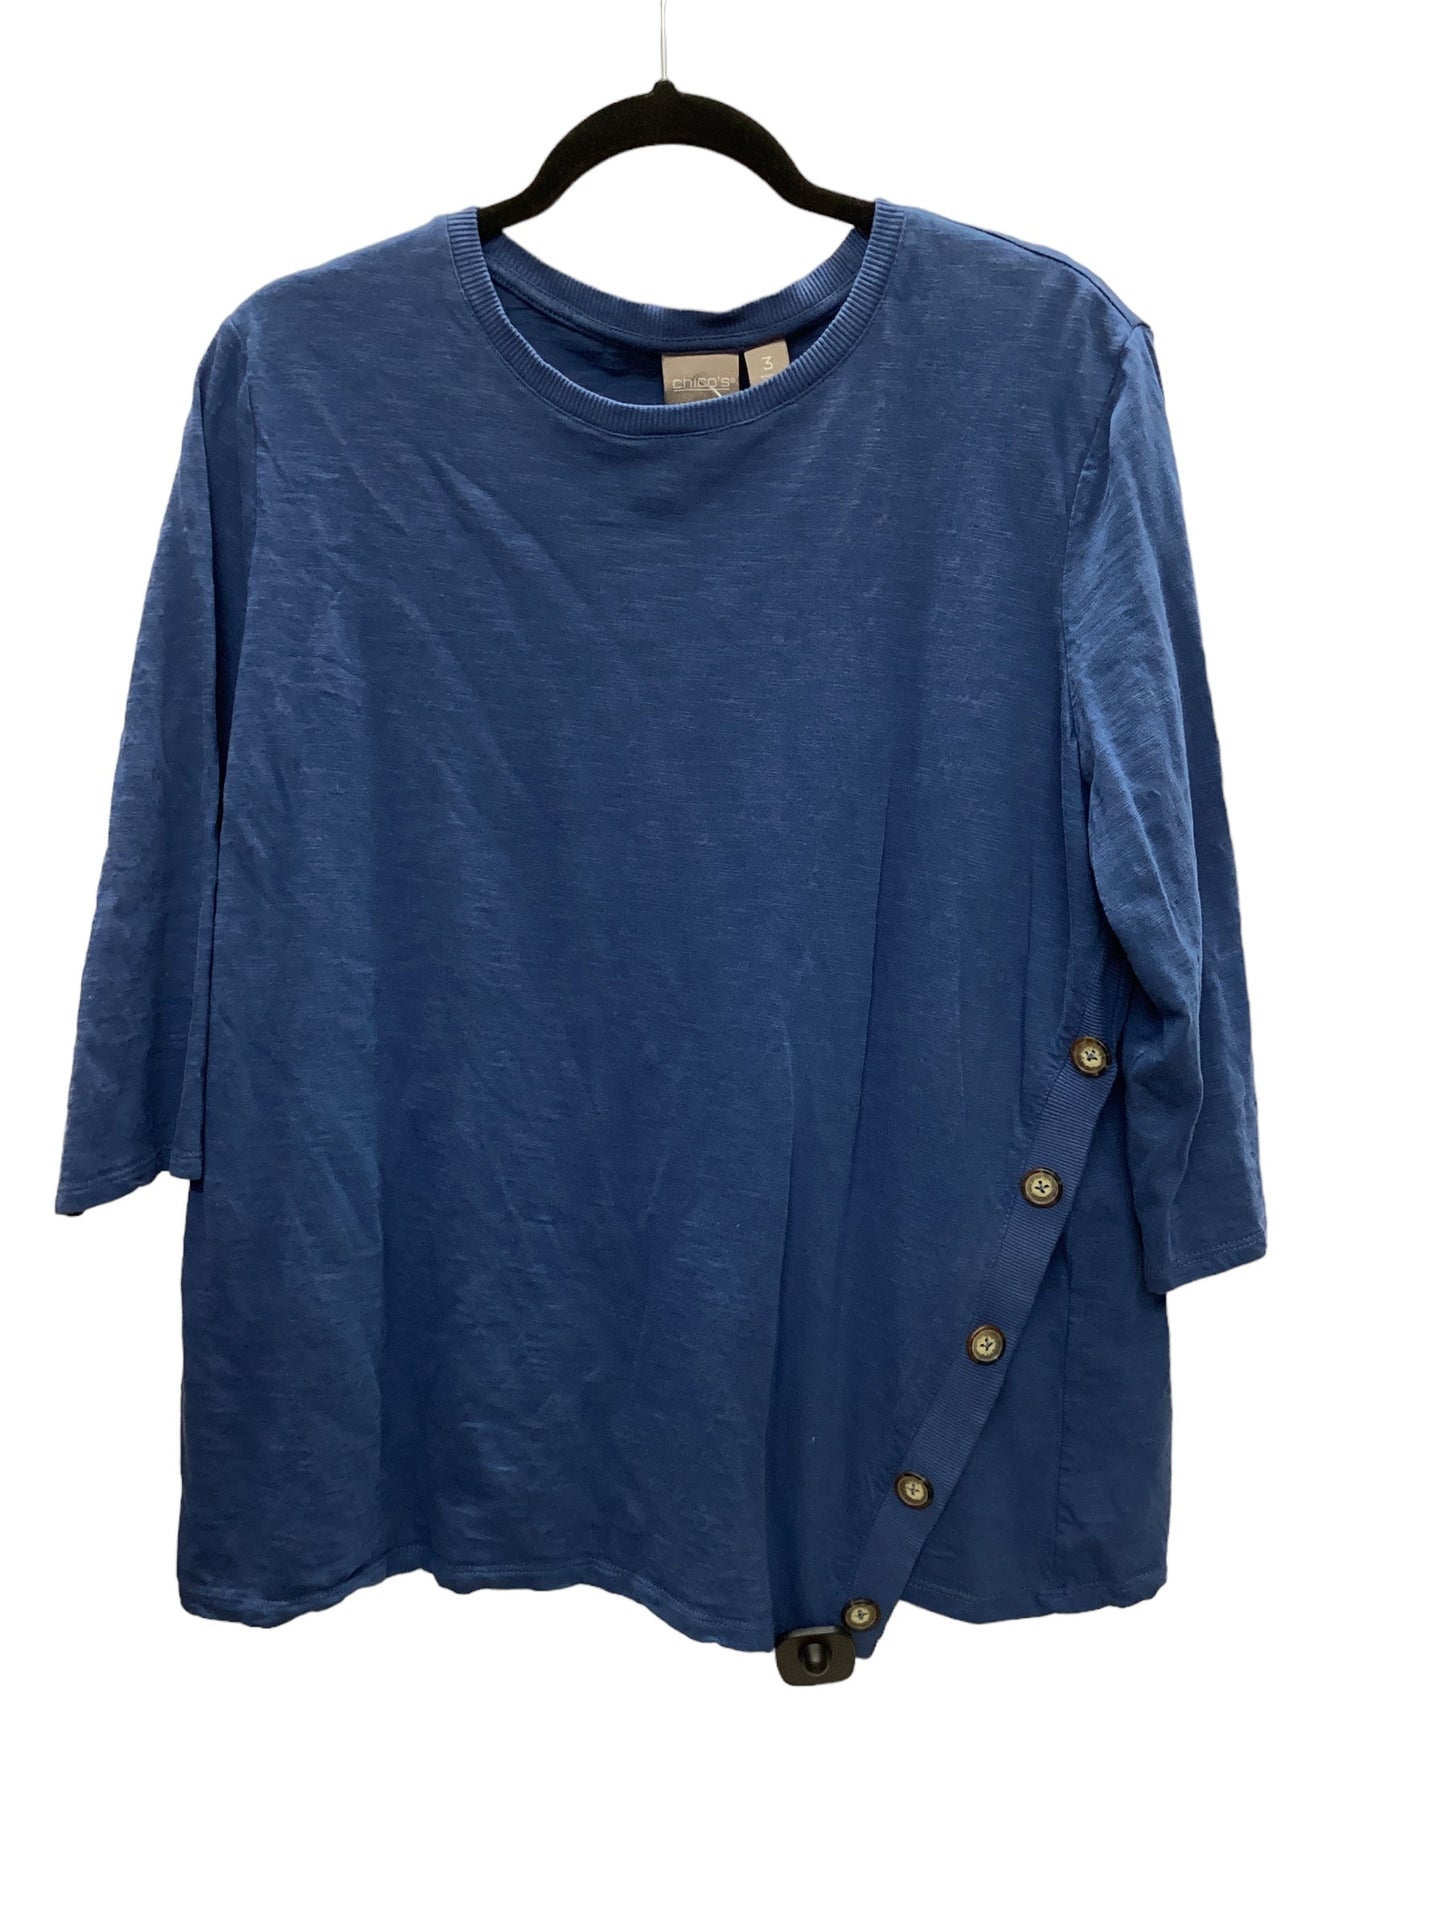 Blue Top Short Sleeve Chicos, Size 3